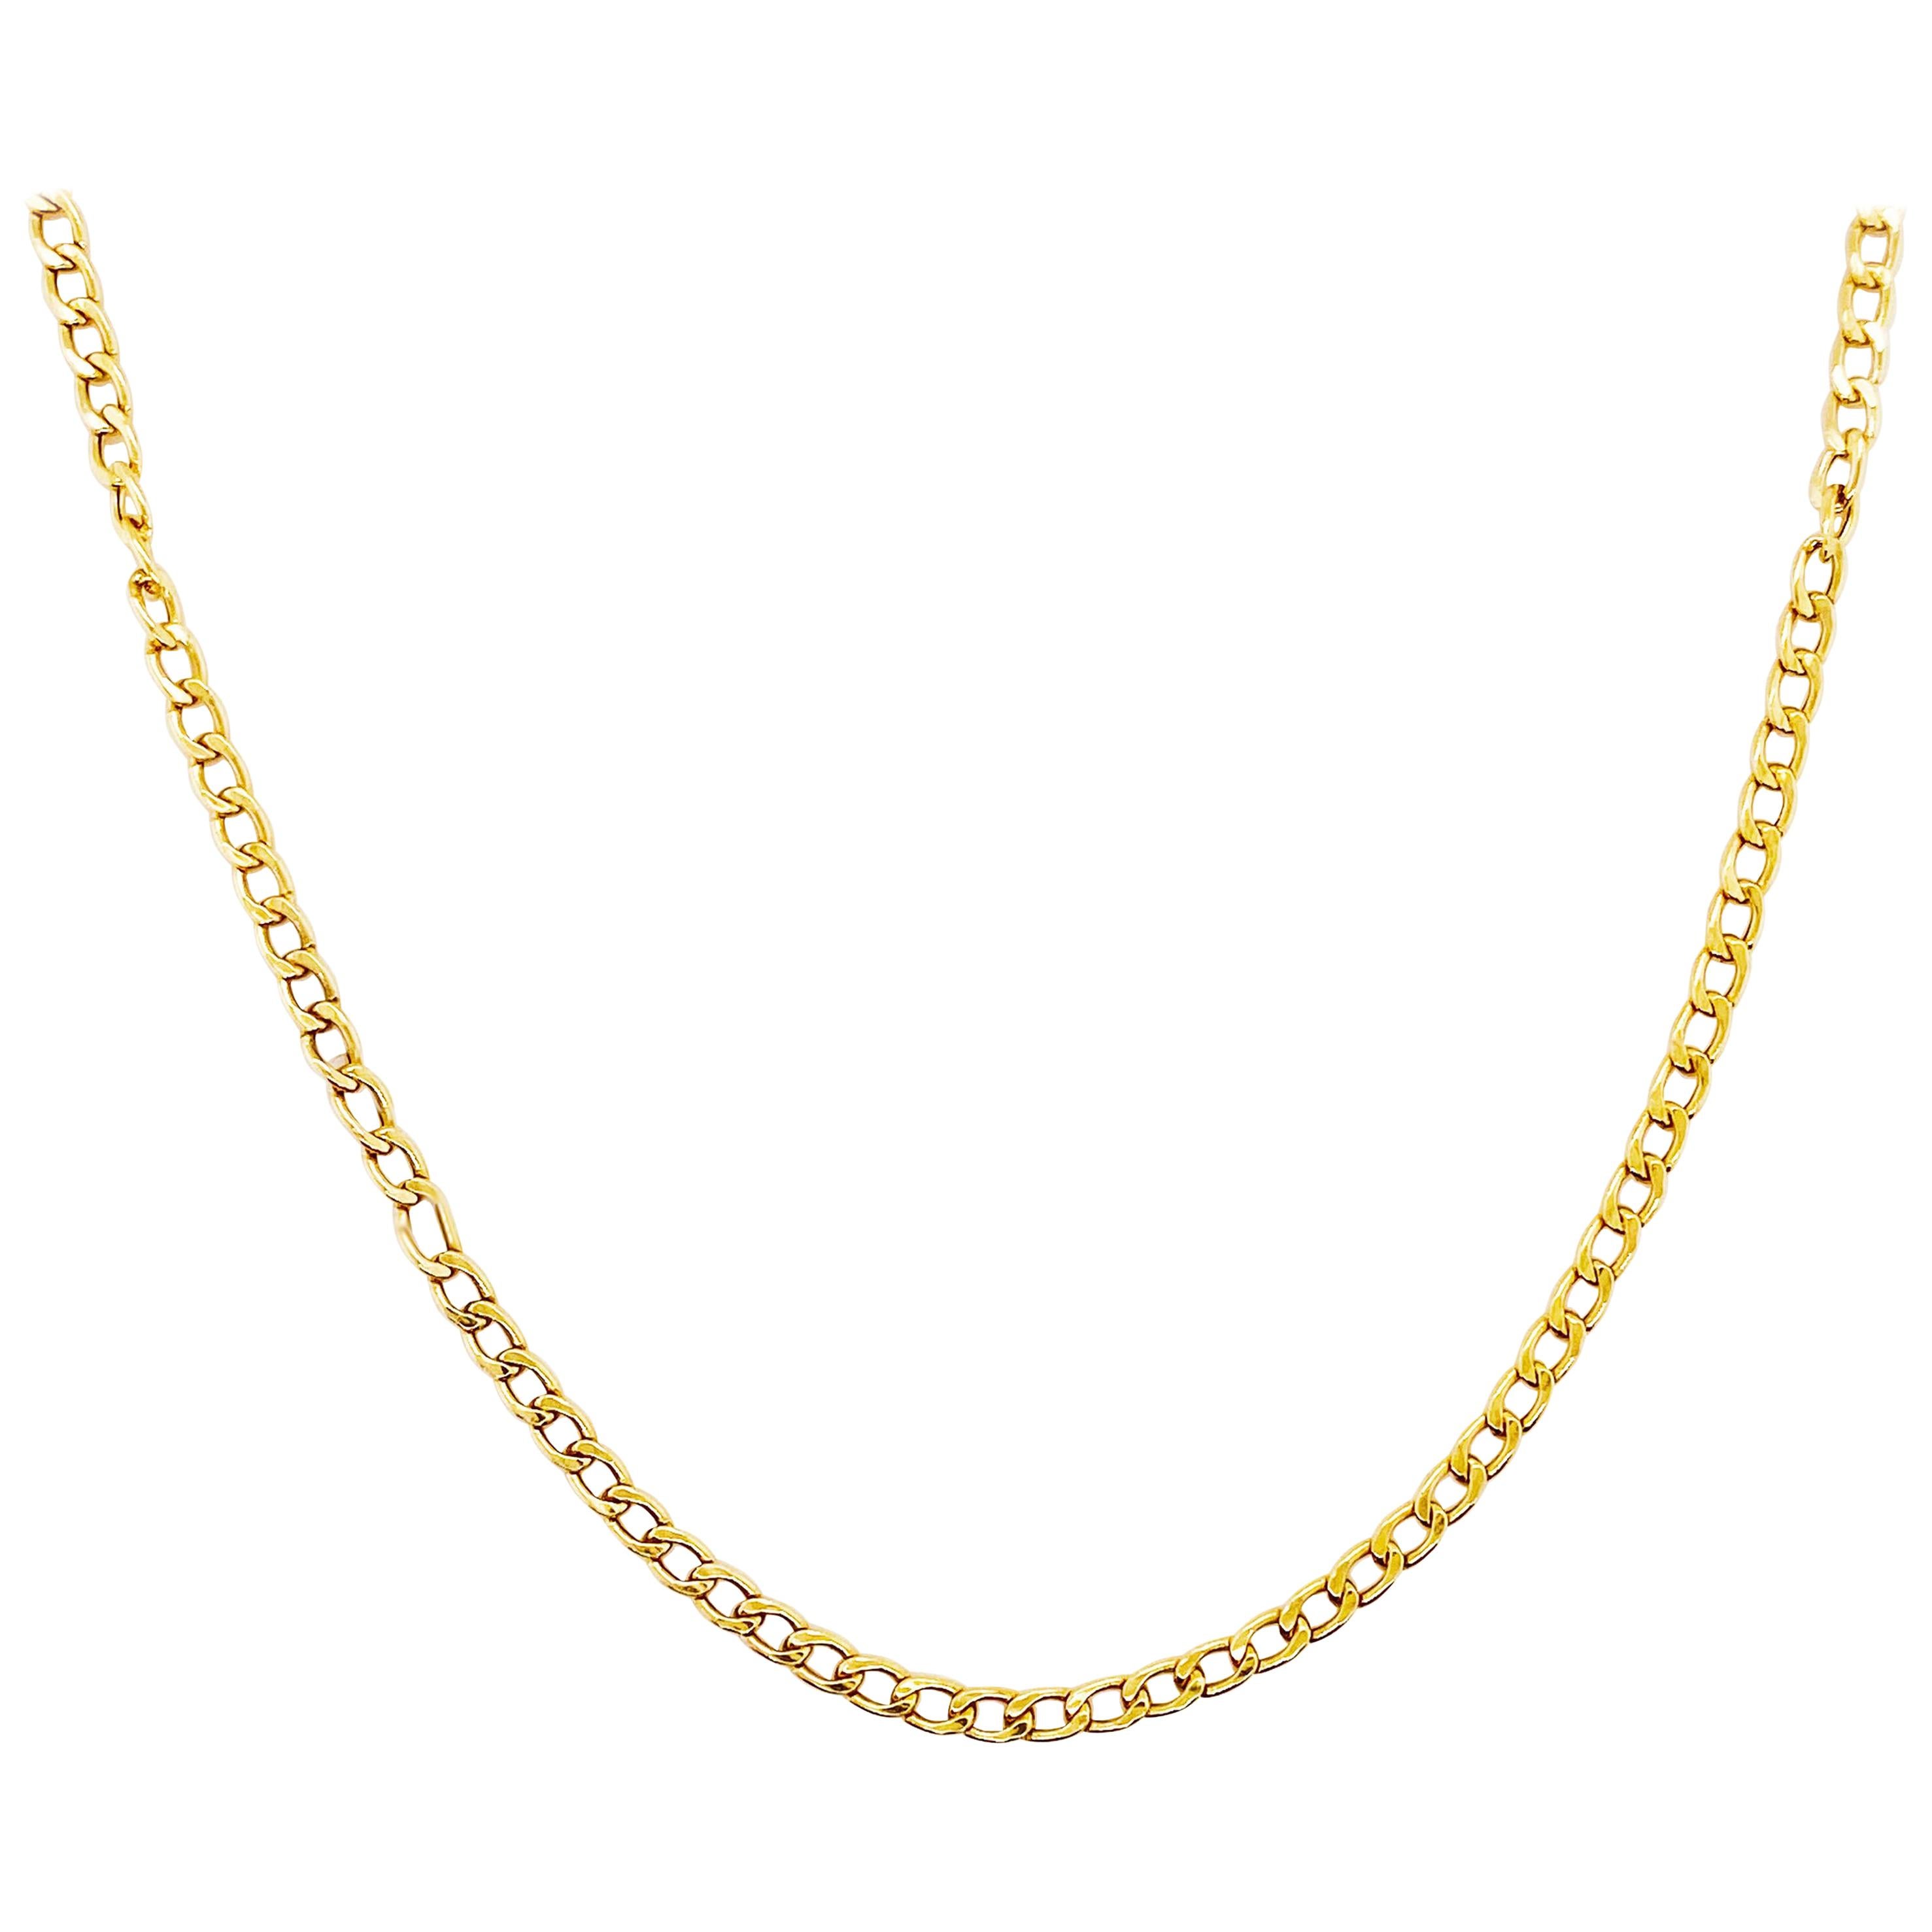 Large Cable Chain Long 14 Karat Yellow Gold, Long Necklace Chain 22inch 3.25mm